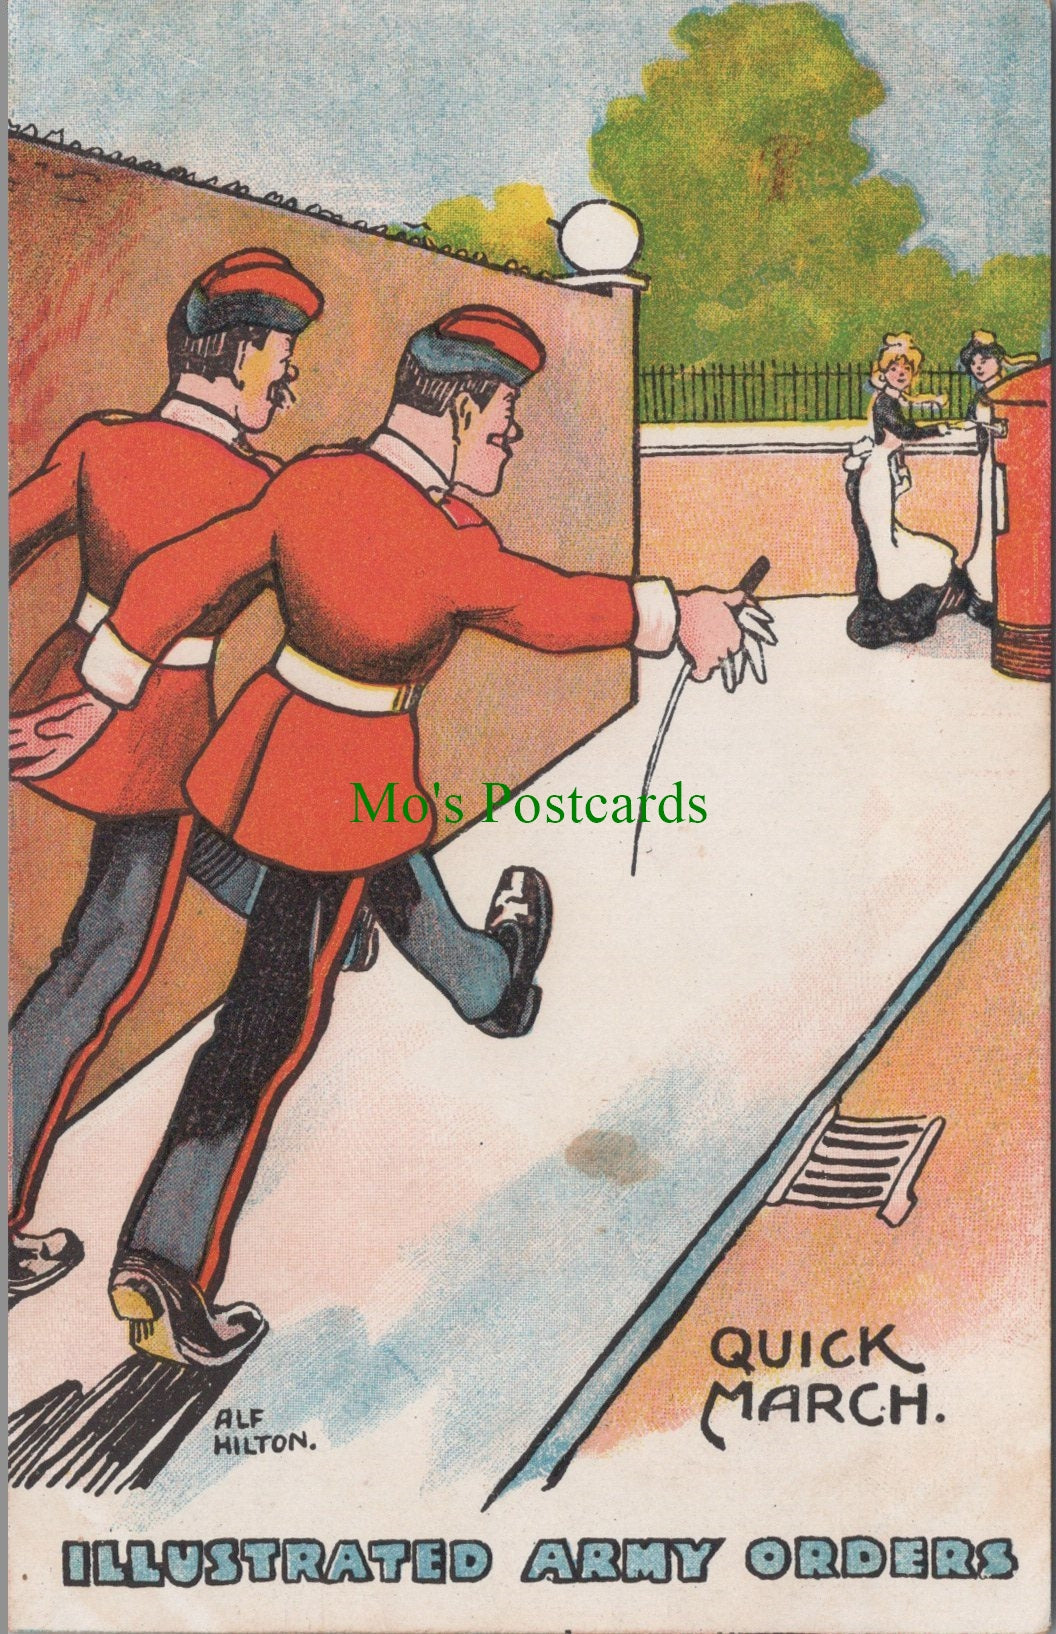 Military Postcard - Illustrated Army Orders